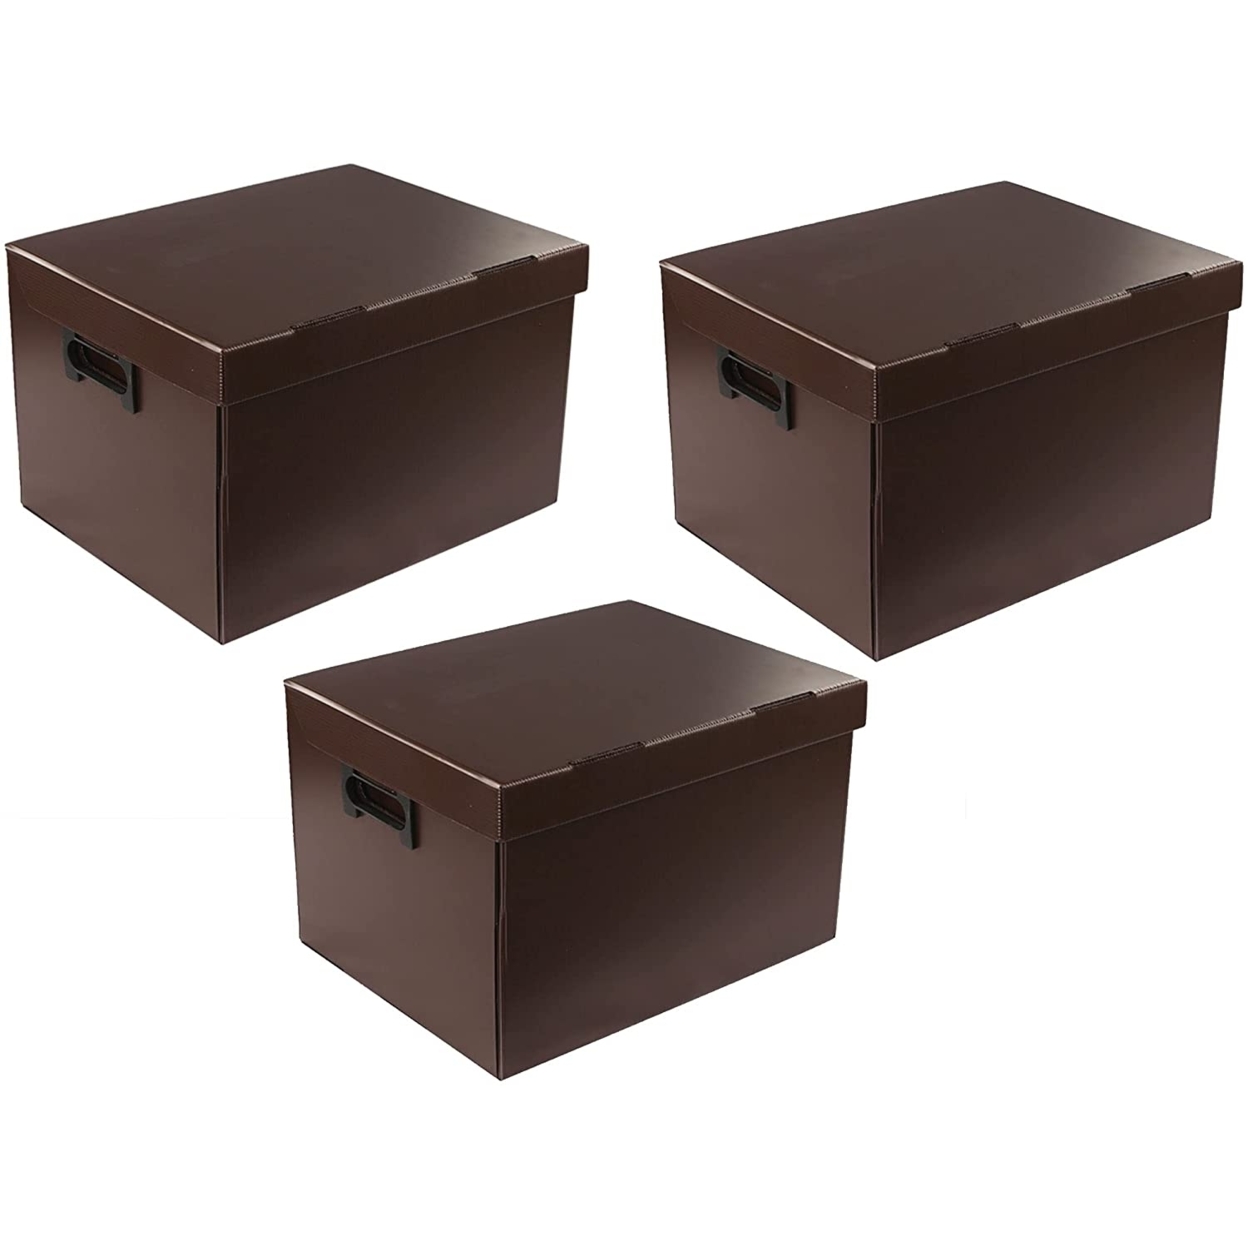 (3 Set) Vaiyer Durable Plastic Filing Storage Organizer Box with Lid, Storage Bins Baskets Containers for Home Office Cabinet for Office Use - brown